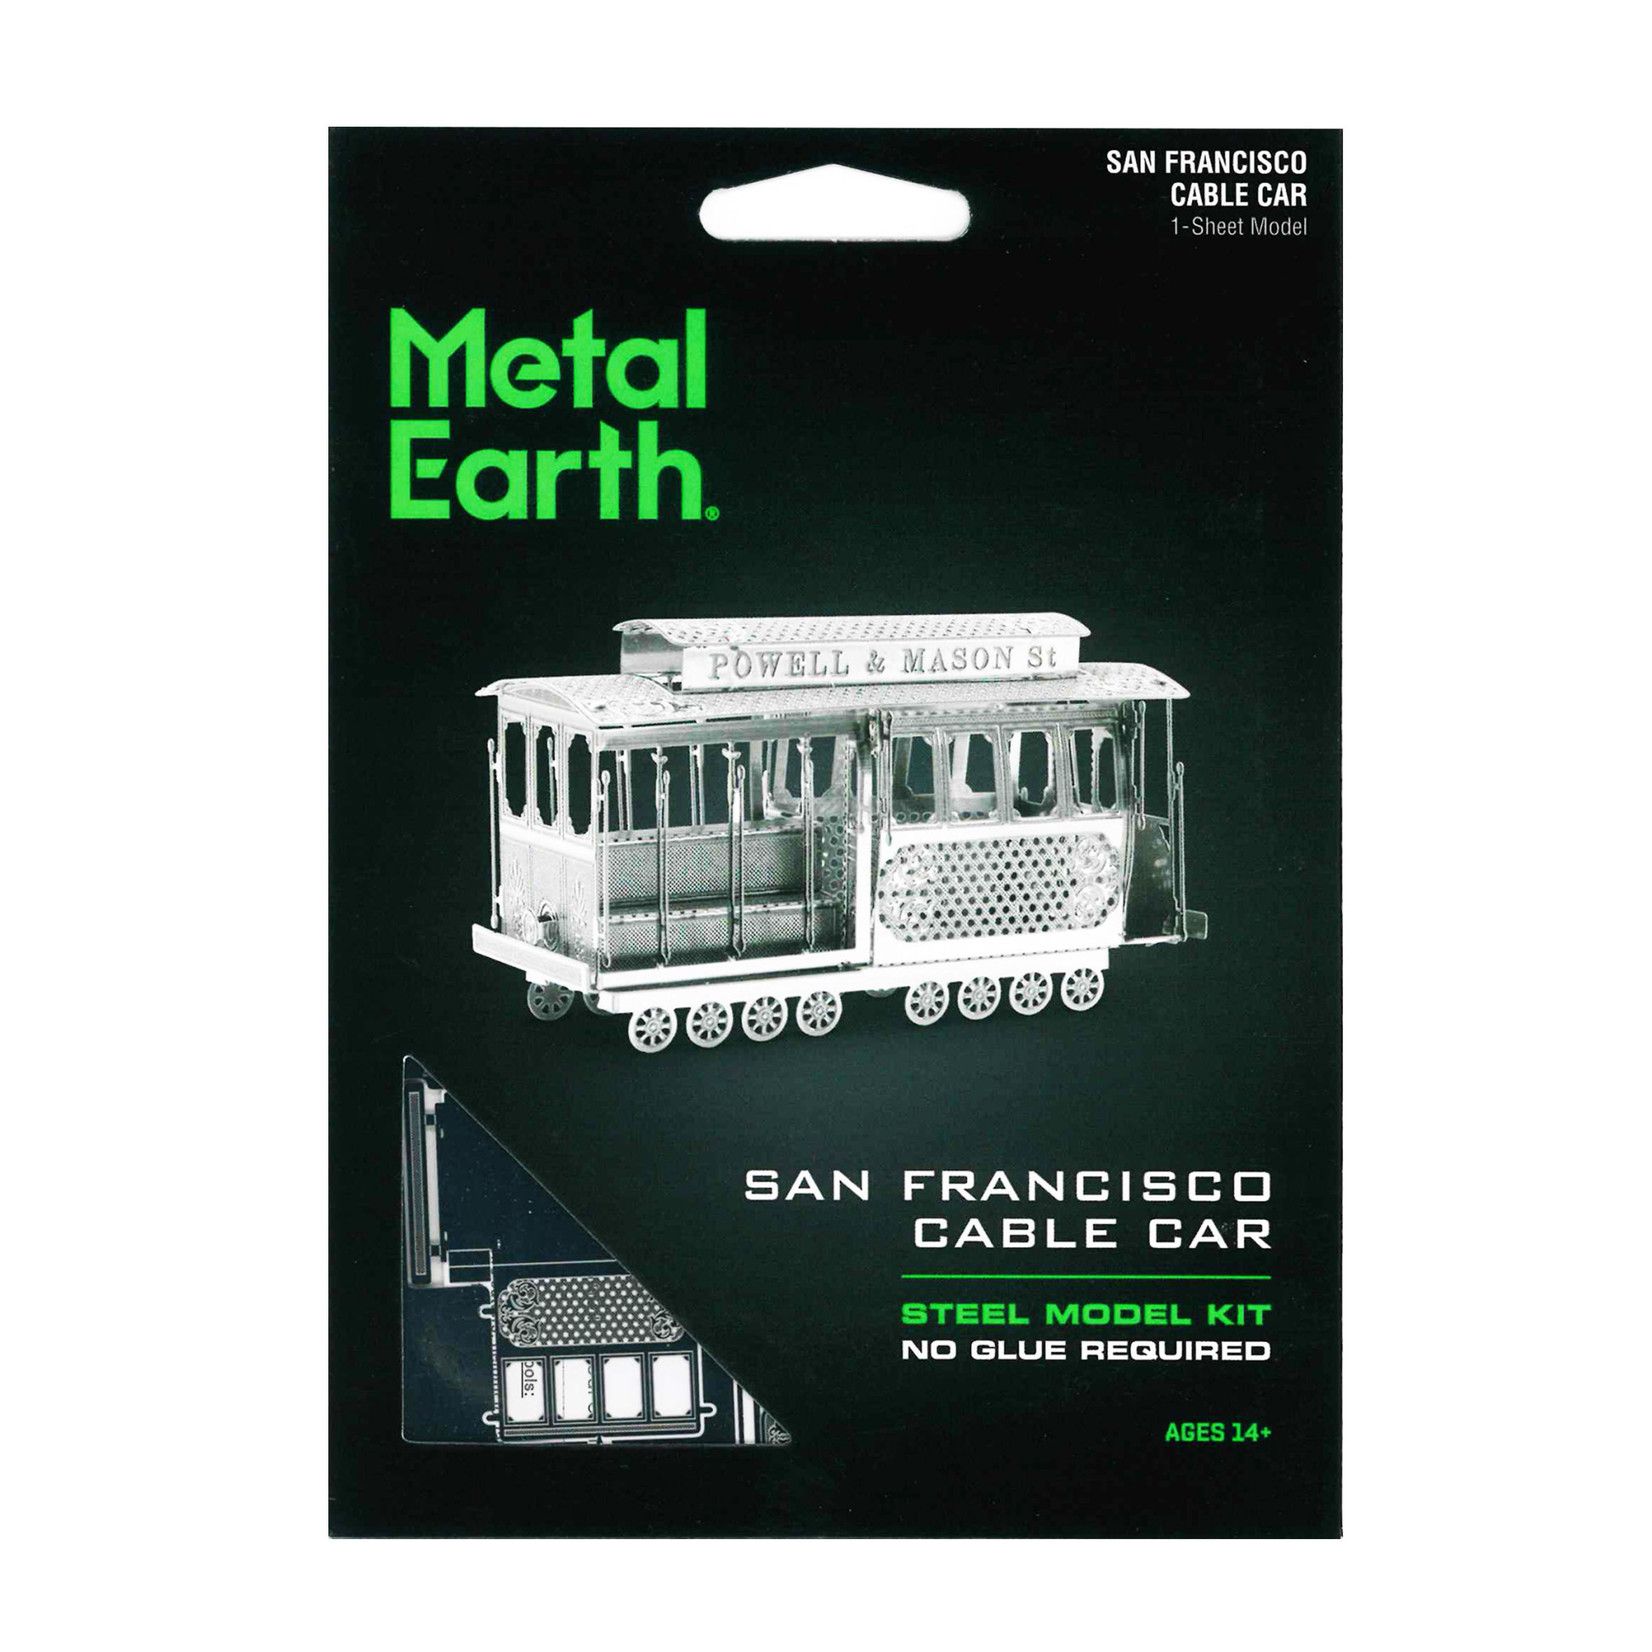 Metal Earth Cable Car